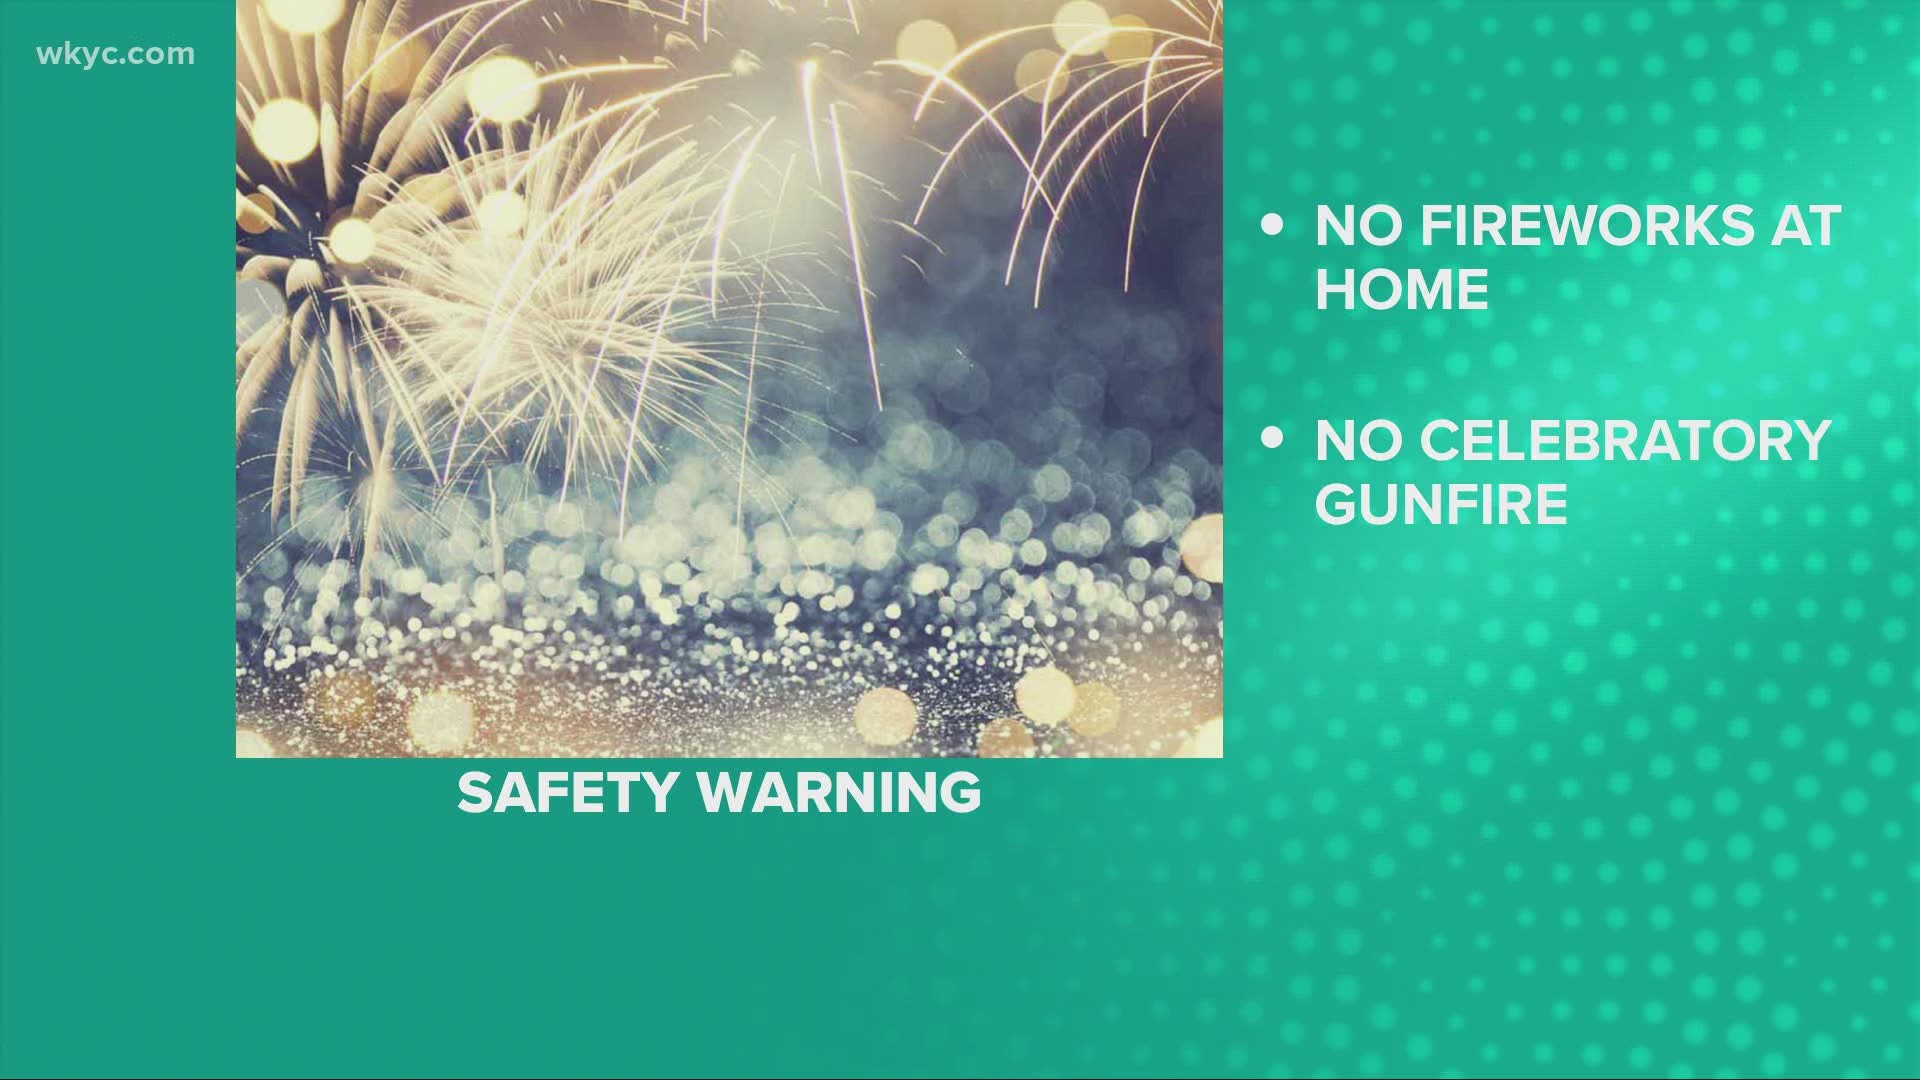 The city issued a reminder to the public about the dangers of both celebratory gunfire and fireworks. Both are prohibited and dangerous.